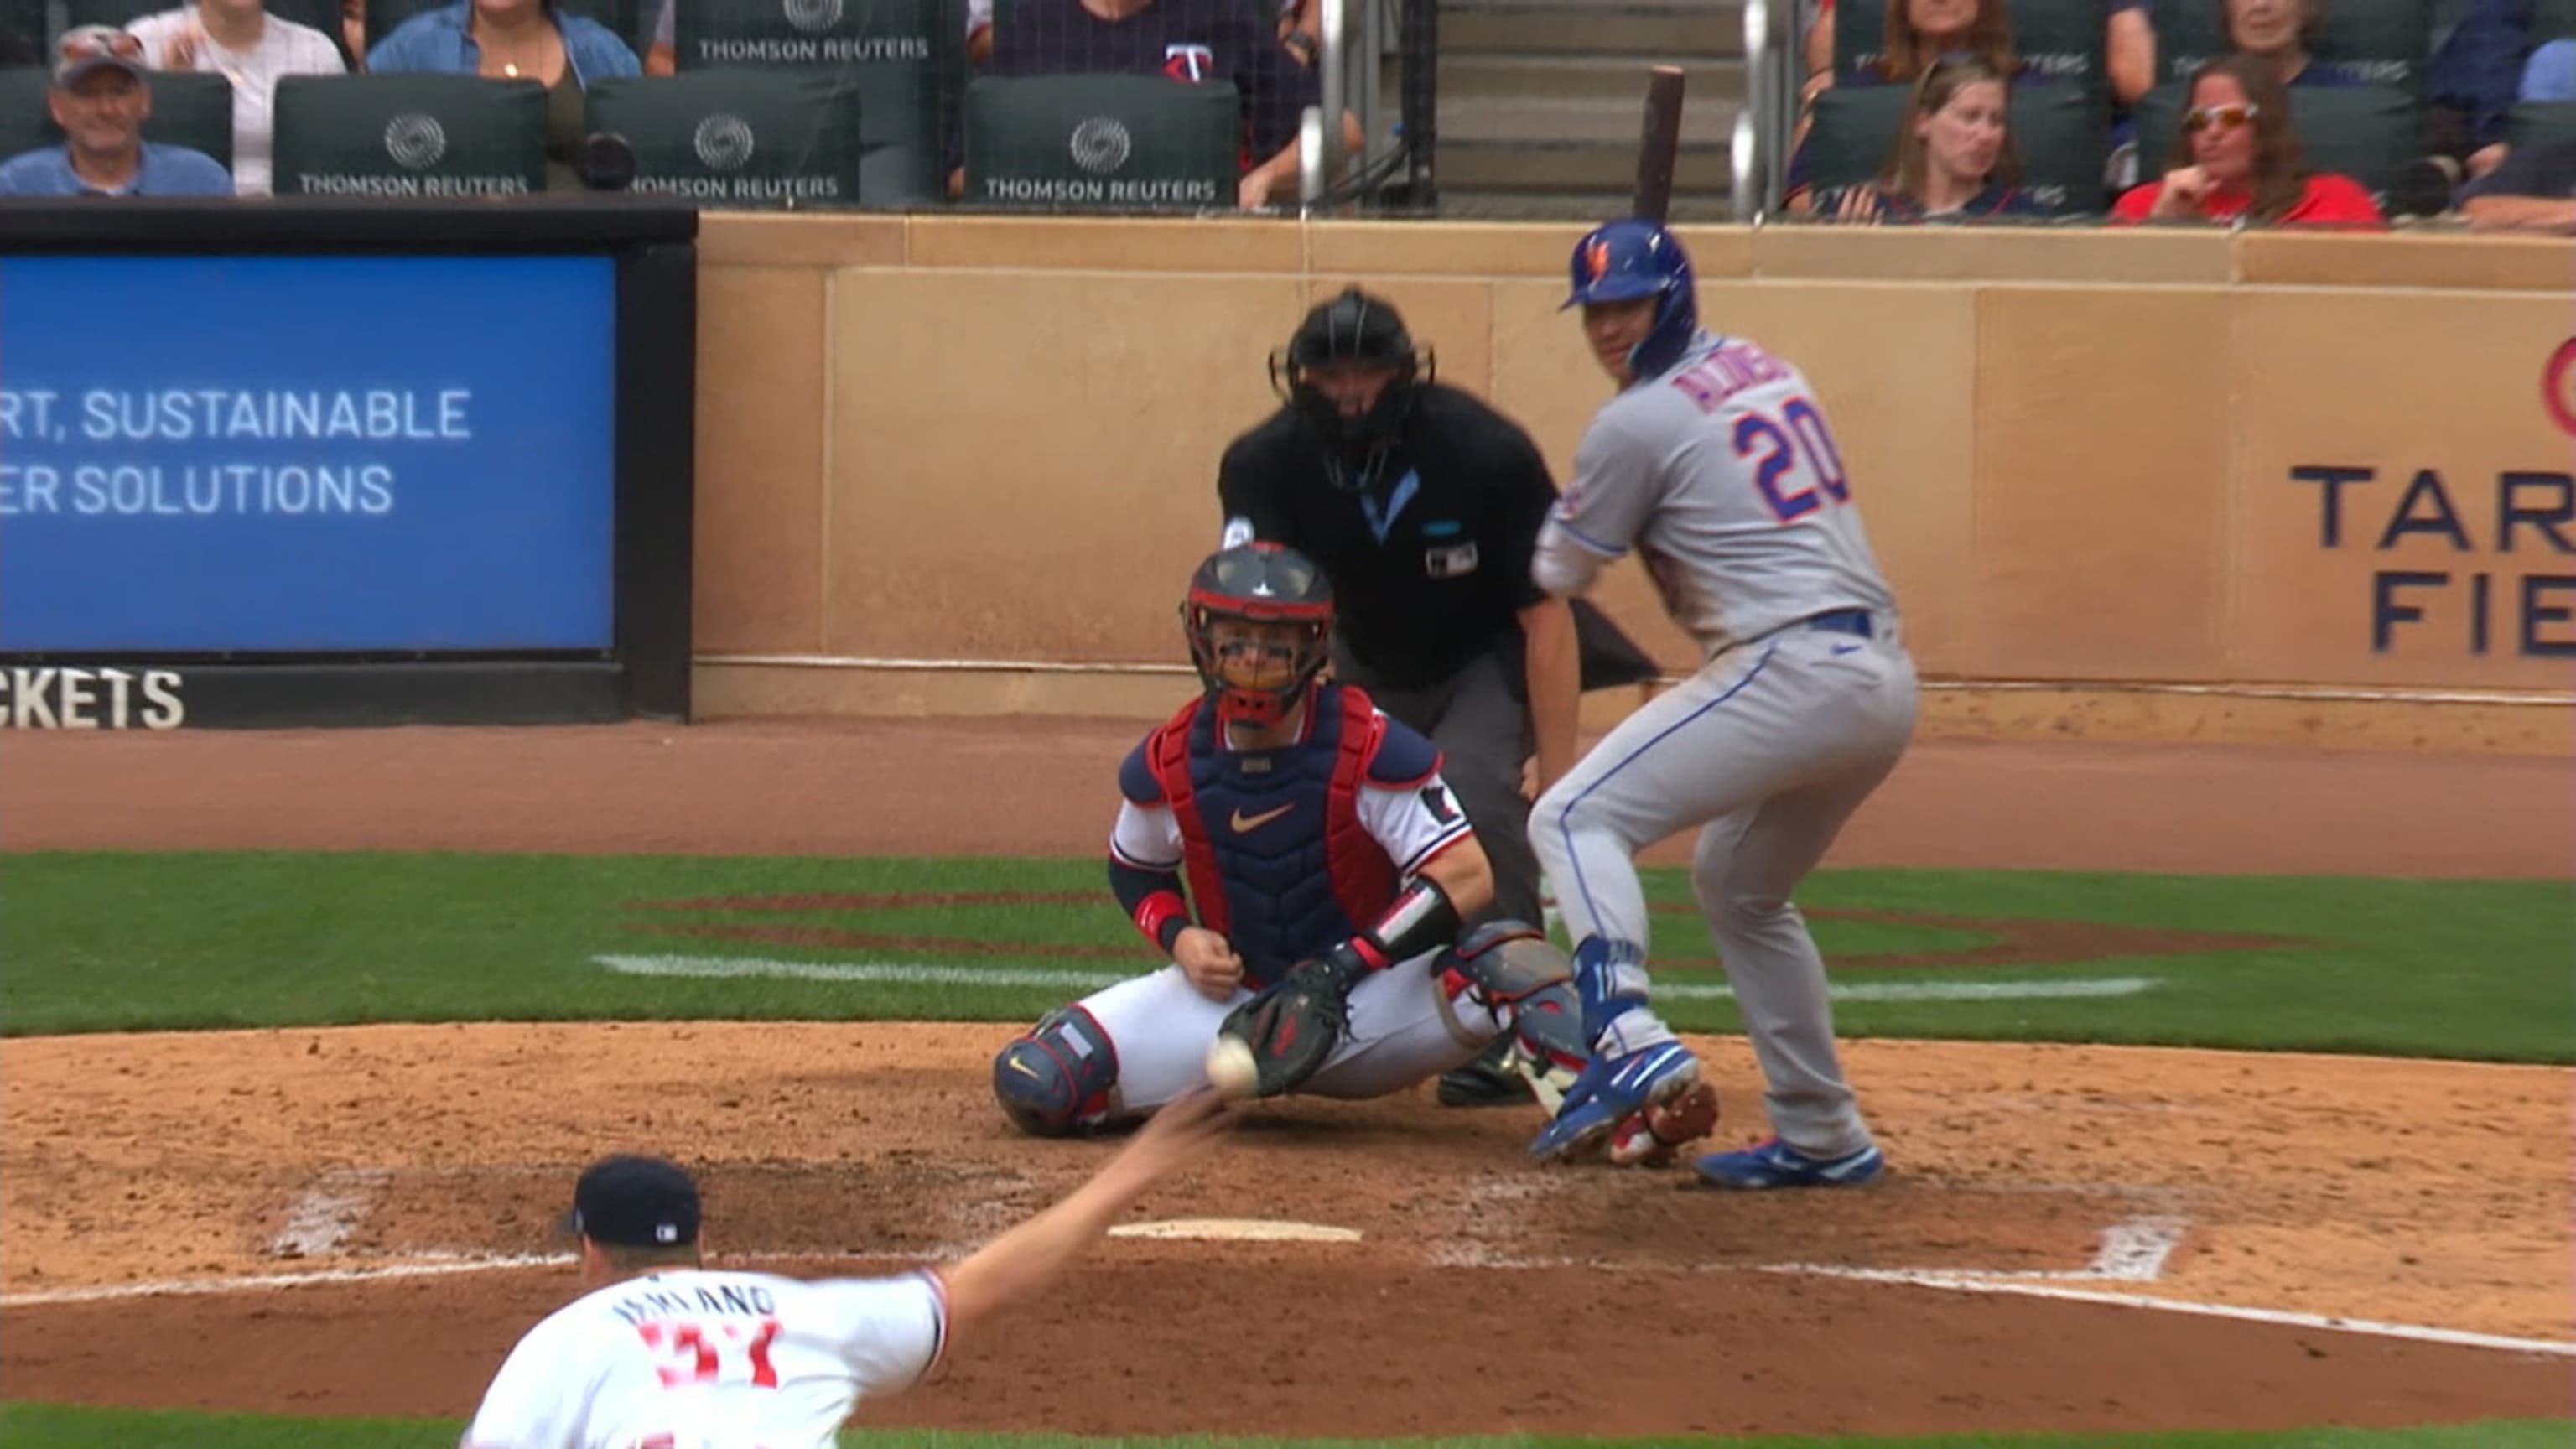 WATCH: Pete Alonso makes incredible stretch at first base